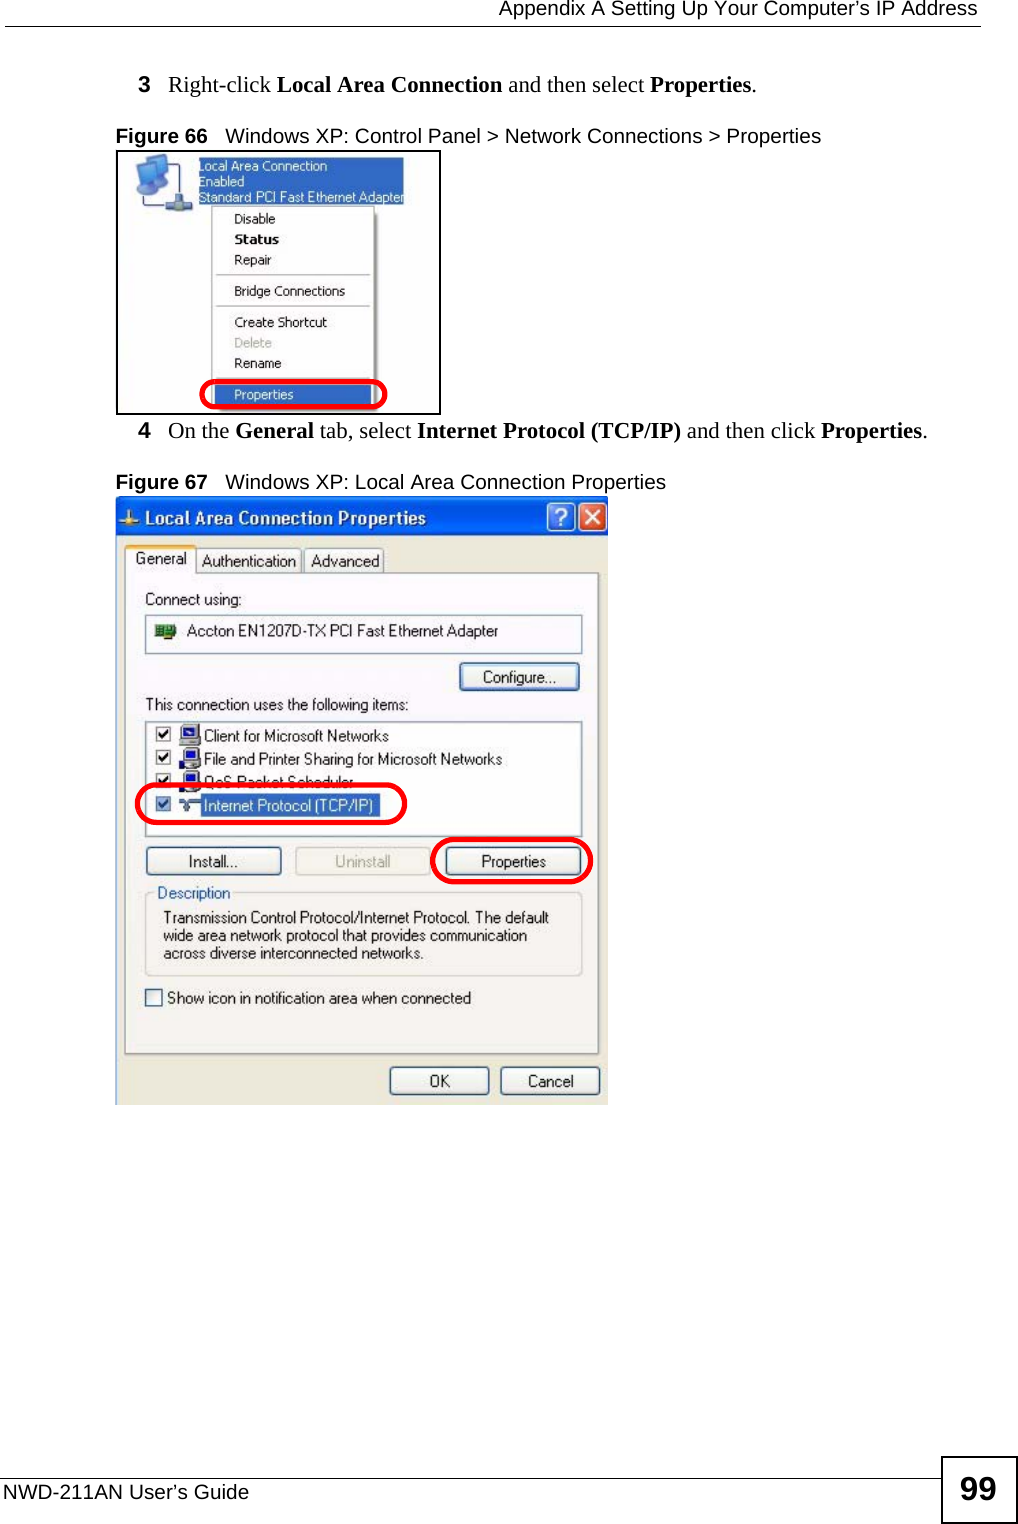  Appendix A Setting Up Your Computer’s IP AddressNWD-211AN User’s Guide 993Right-click Local Area Connection and then select Properties.Figure 66   Windows XP: Control Panel &gt; Network Connections &gt; Properties4On the General tab, select Internet Protocol (TCP/IP) and then click Properties.Figure 67   Windows XP: Local Area Connection Properties